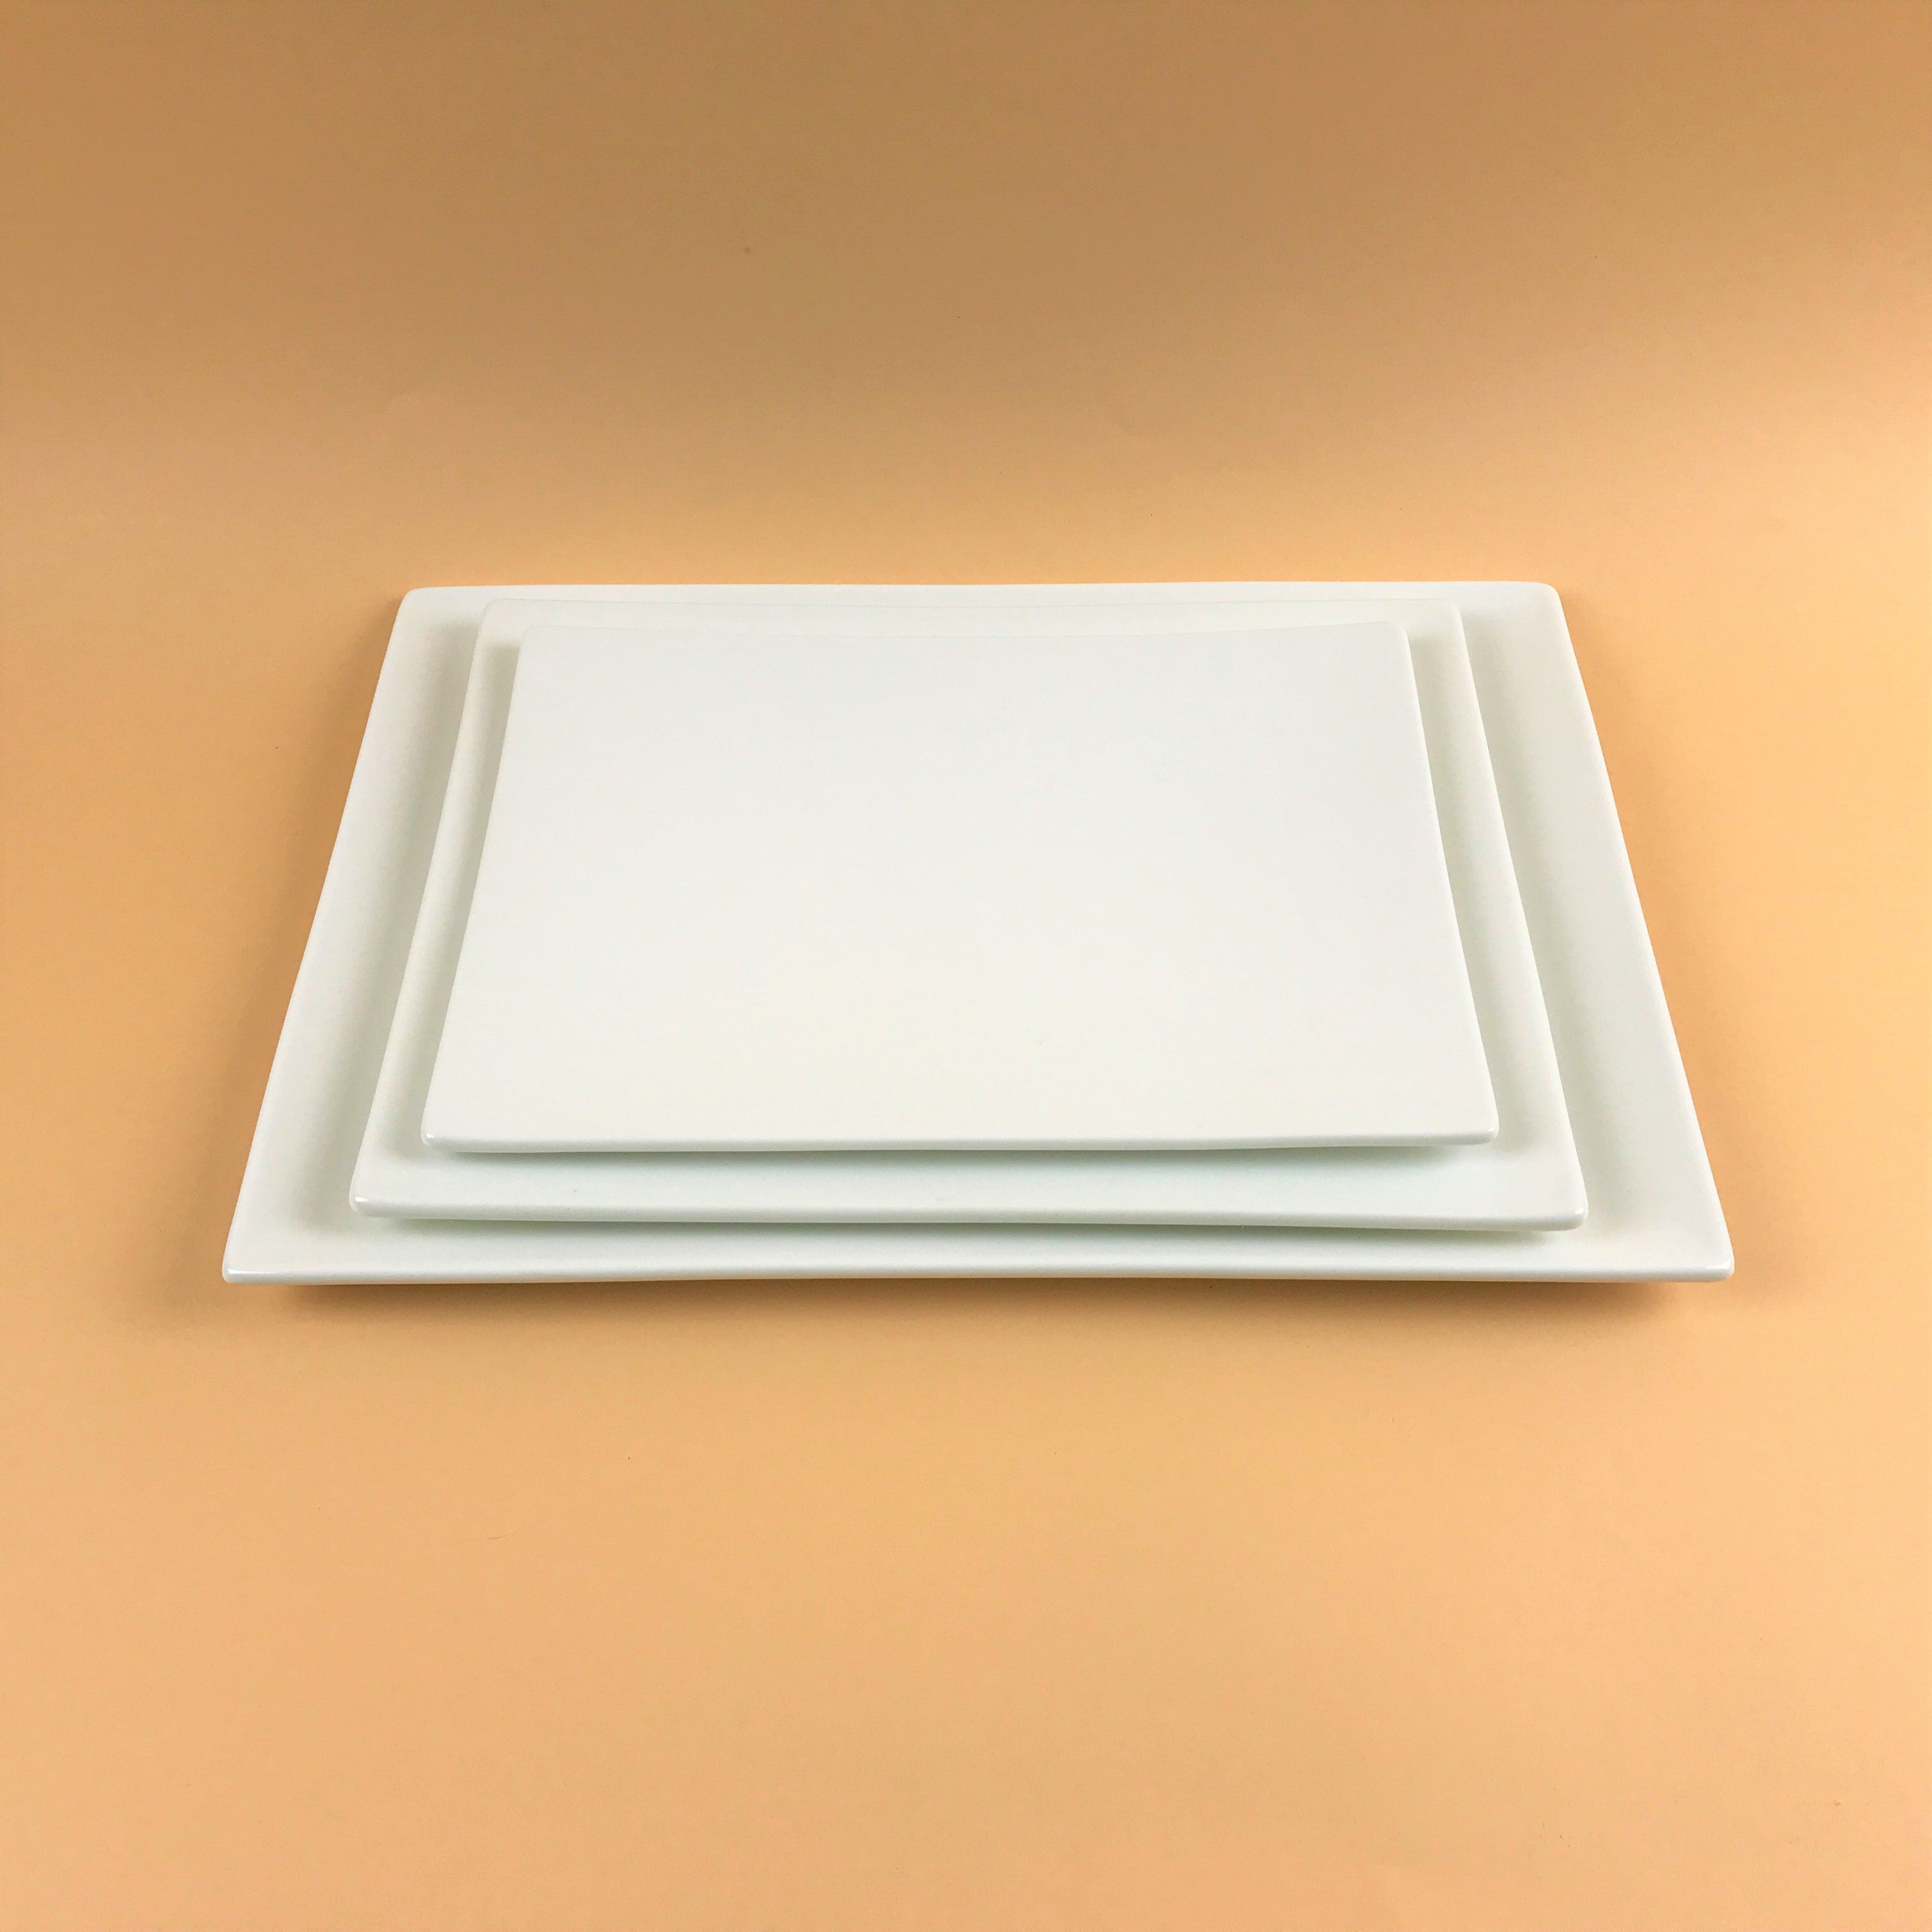 Grove Rectangle Plates in 4 sizes, 10", 11 1/2", 13 3/4", and 15 3/4"